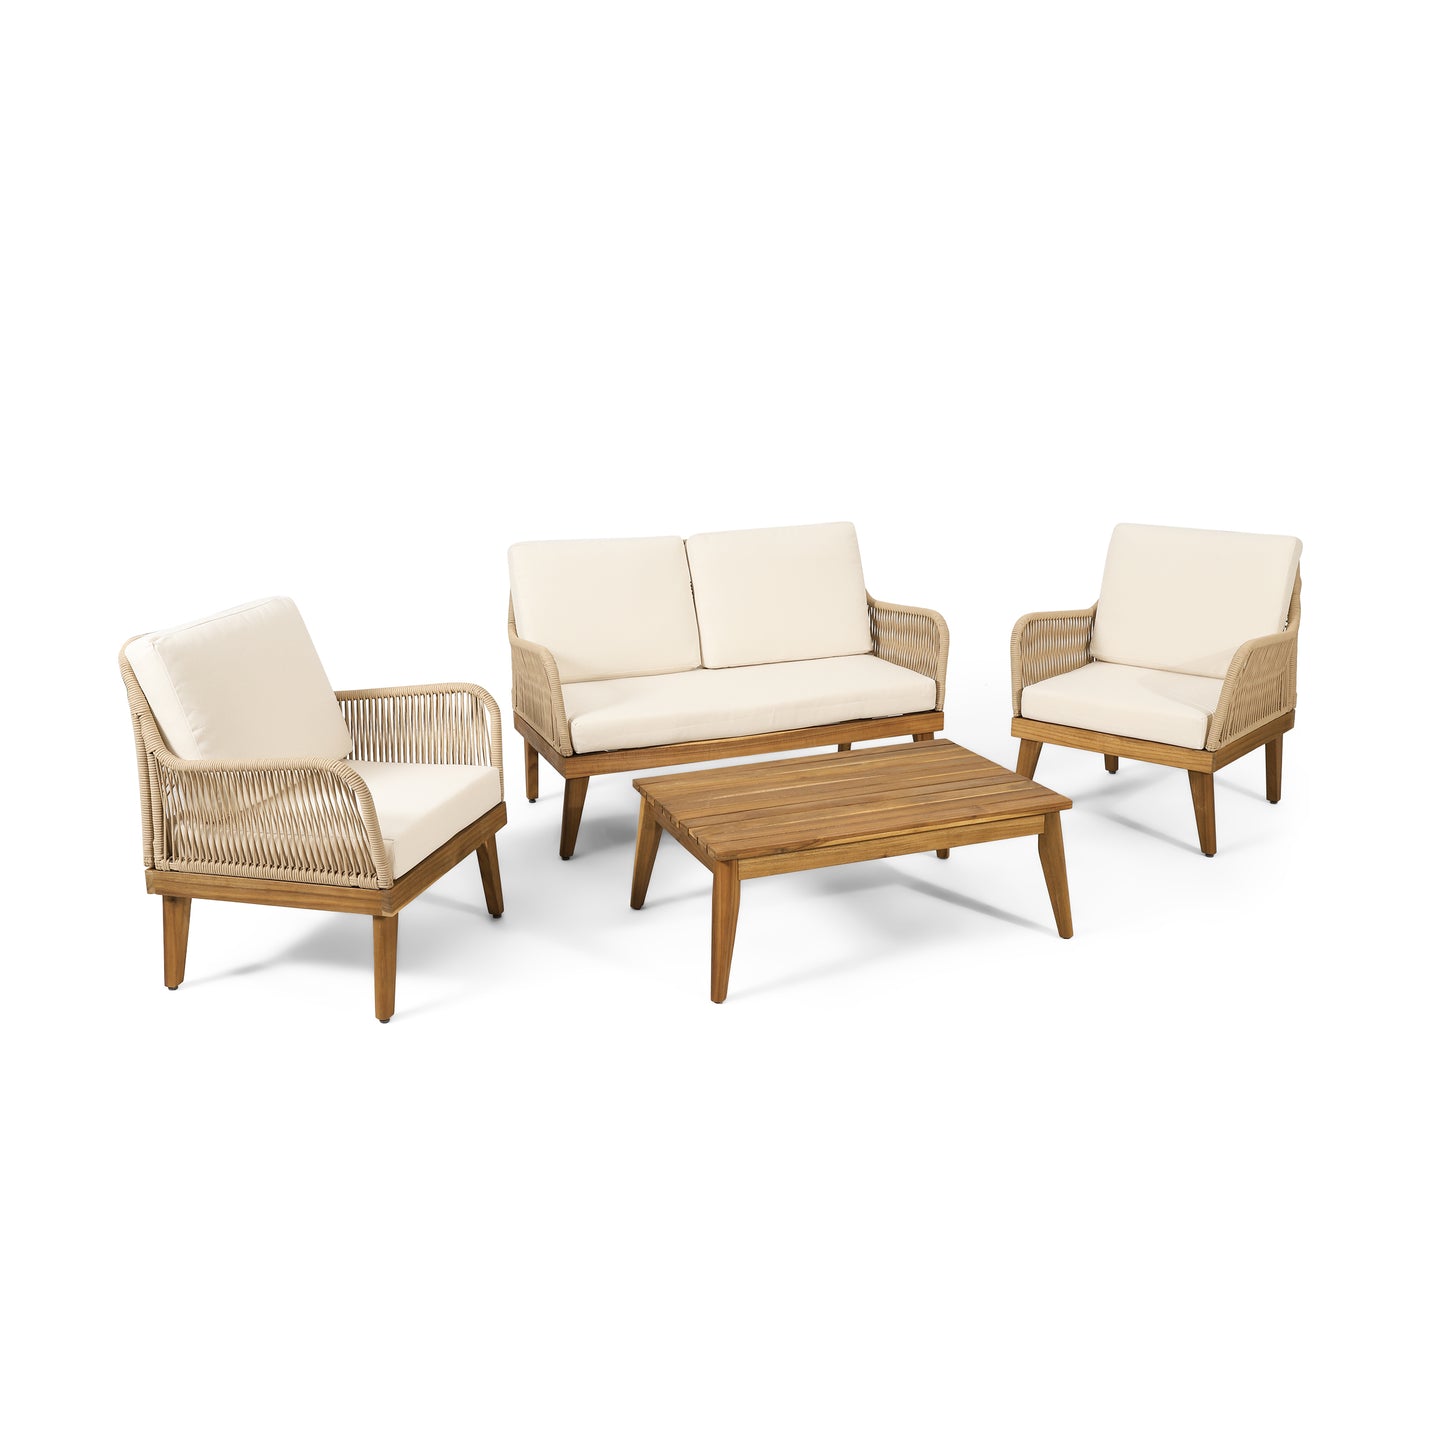 Hueber Outdoor Acacia Wood Chat Set with Cushion, Teak, Light Brown, and Beige